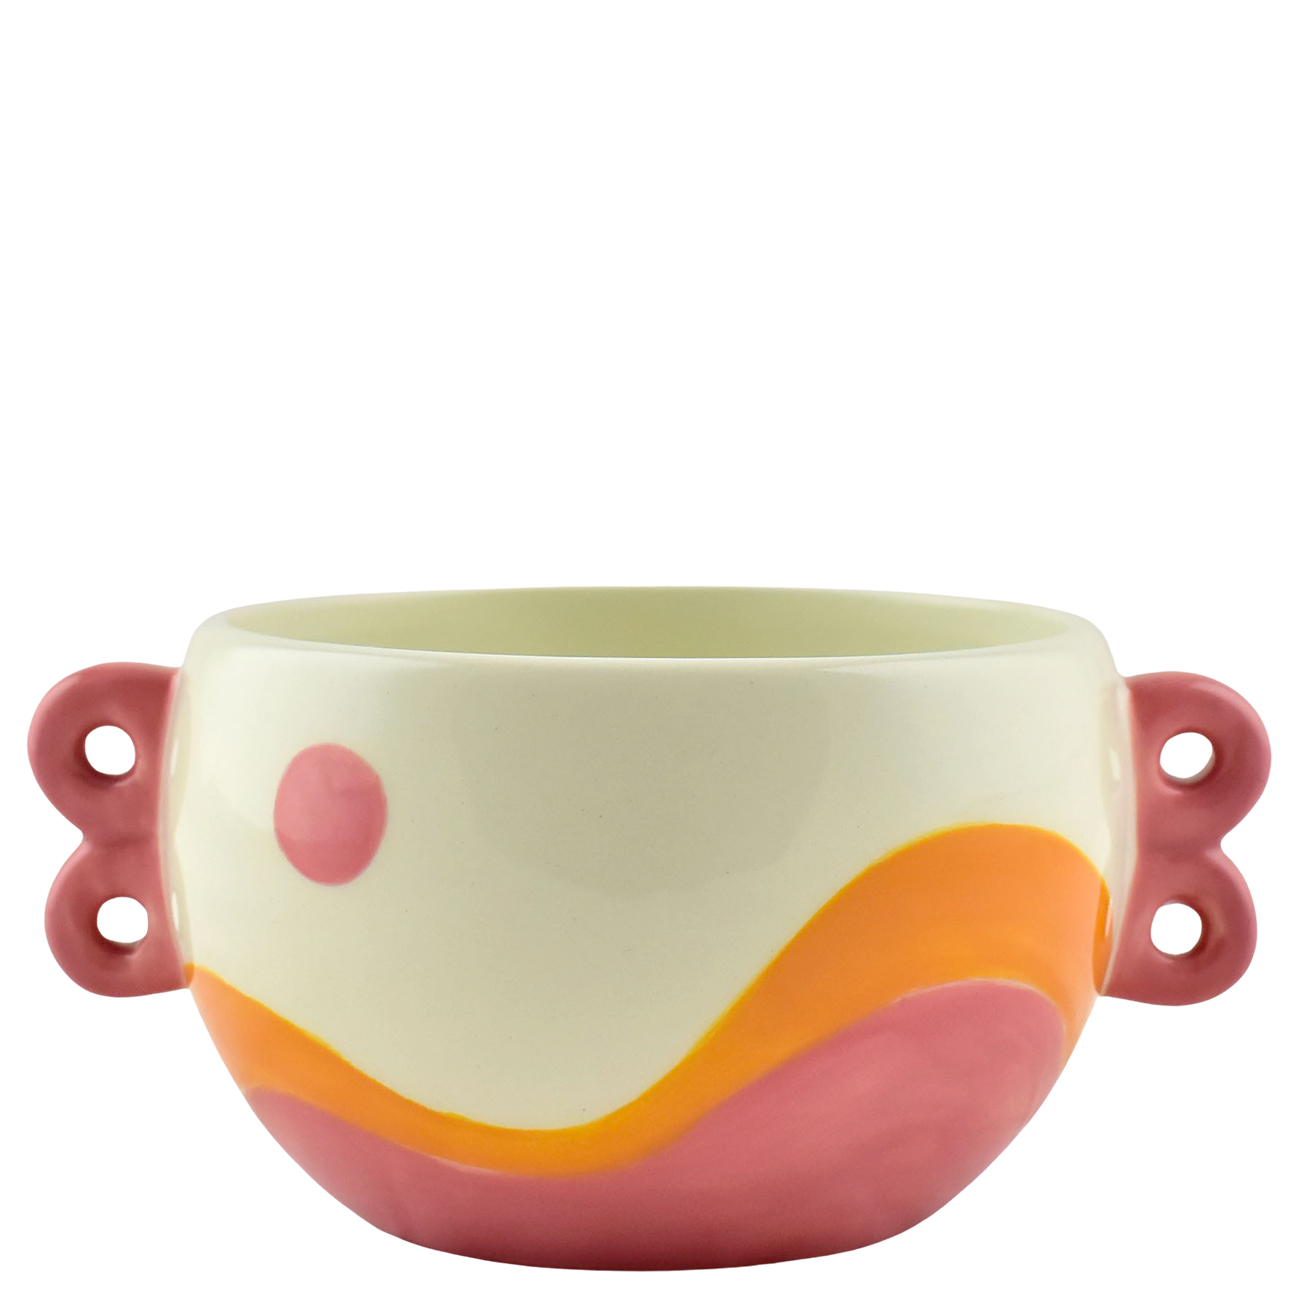 Bowl Dolores - Sunset Sea Gift